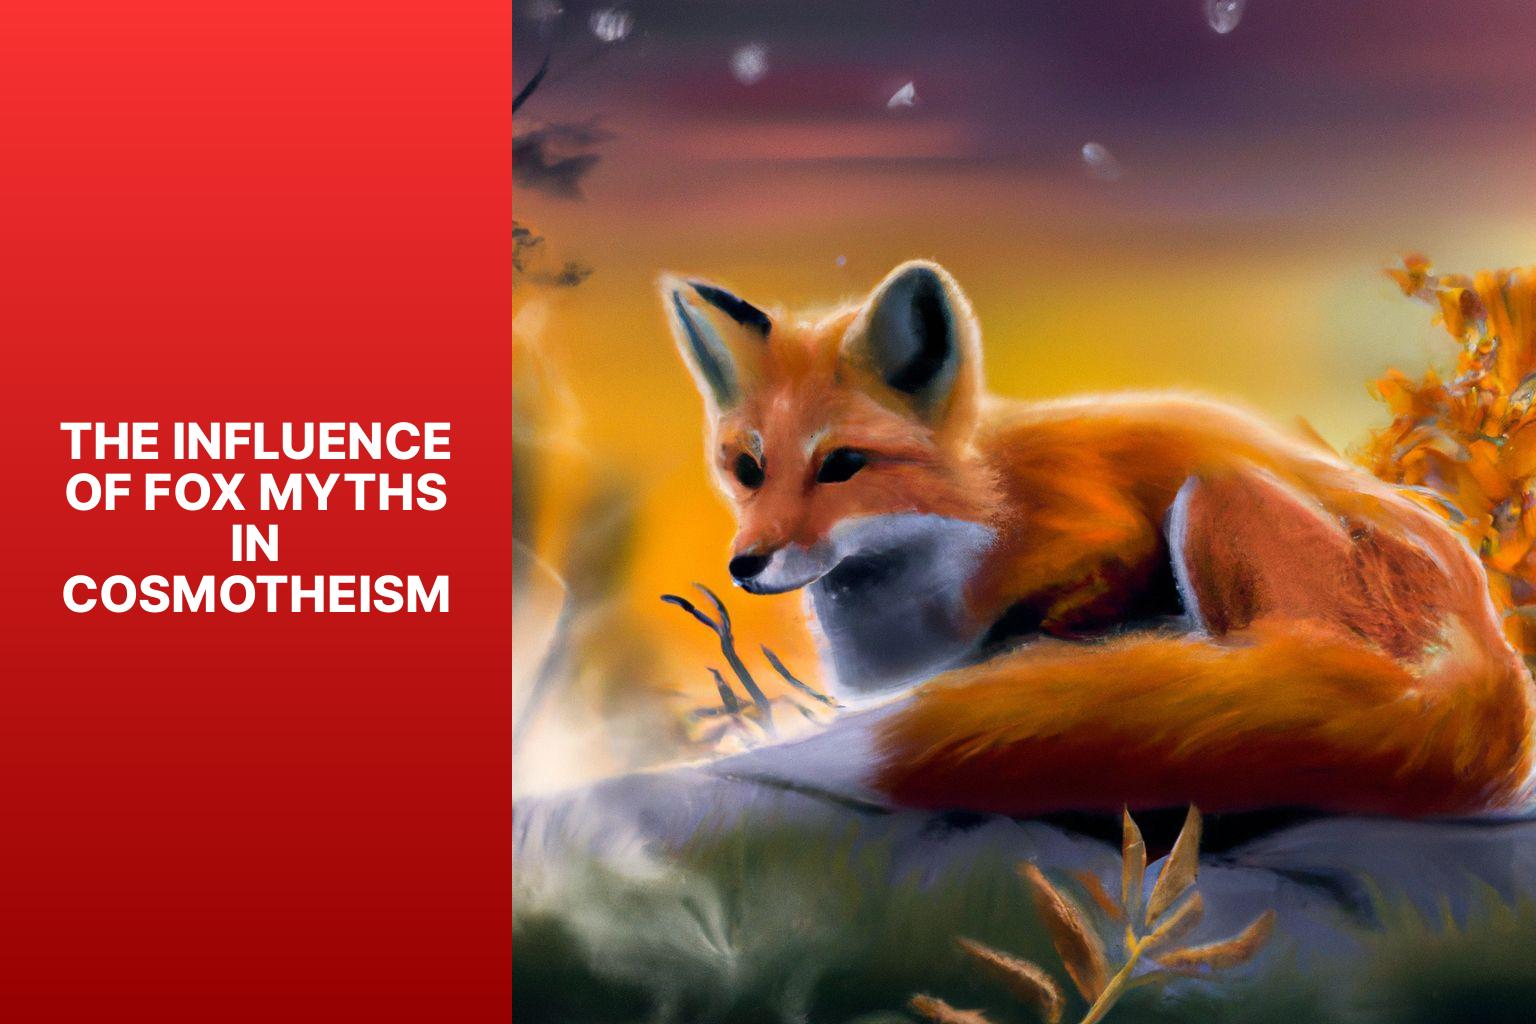 The Influence of Fox Myths in Cosmotheism - Fox Myths in Cosmotheism 